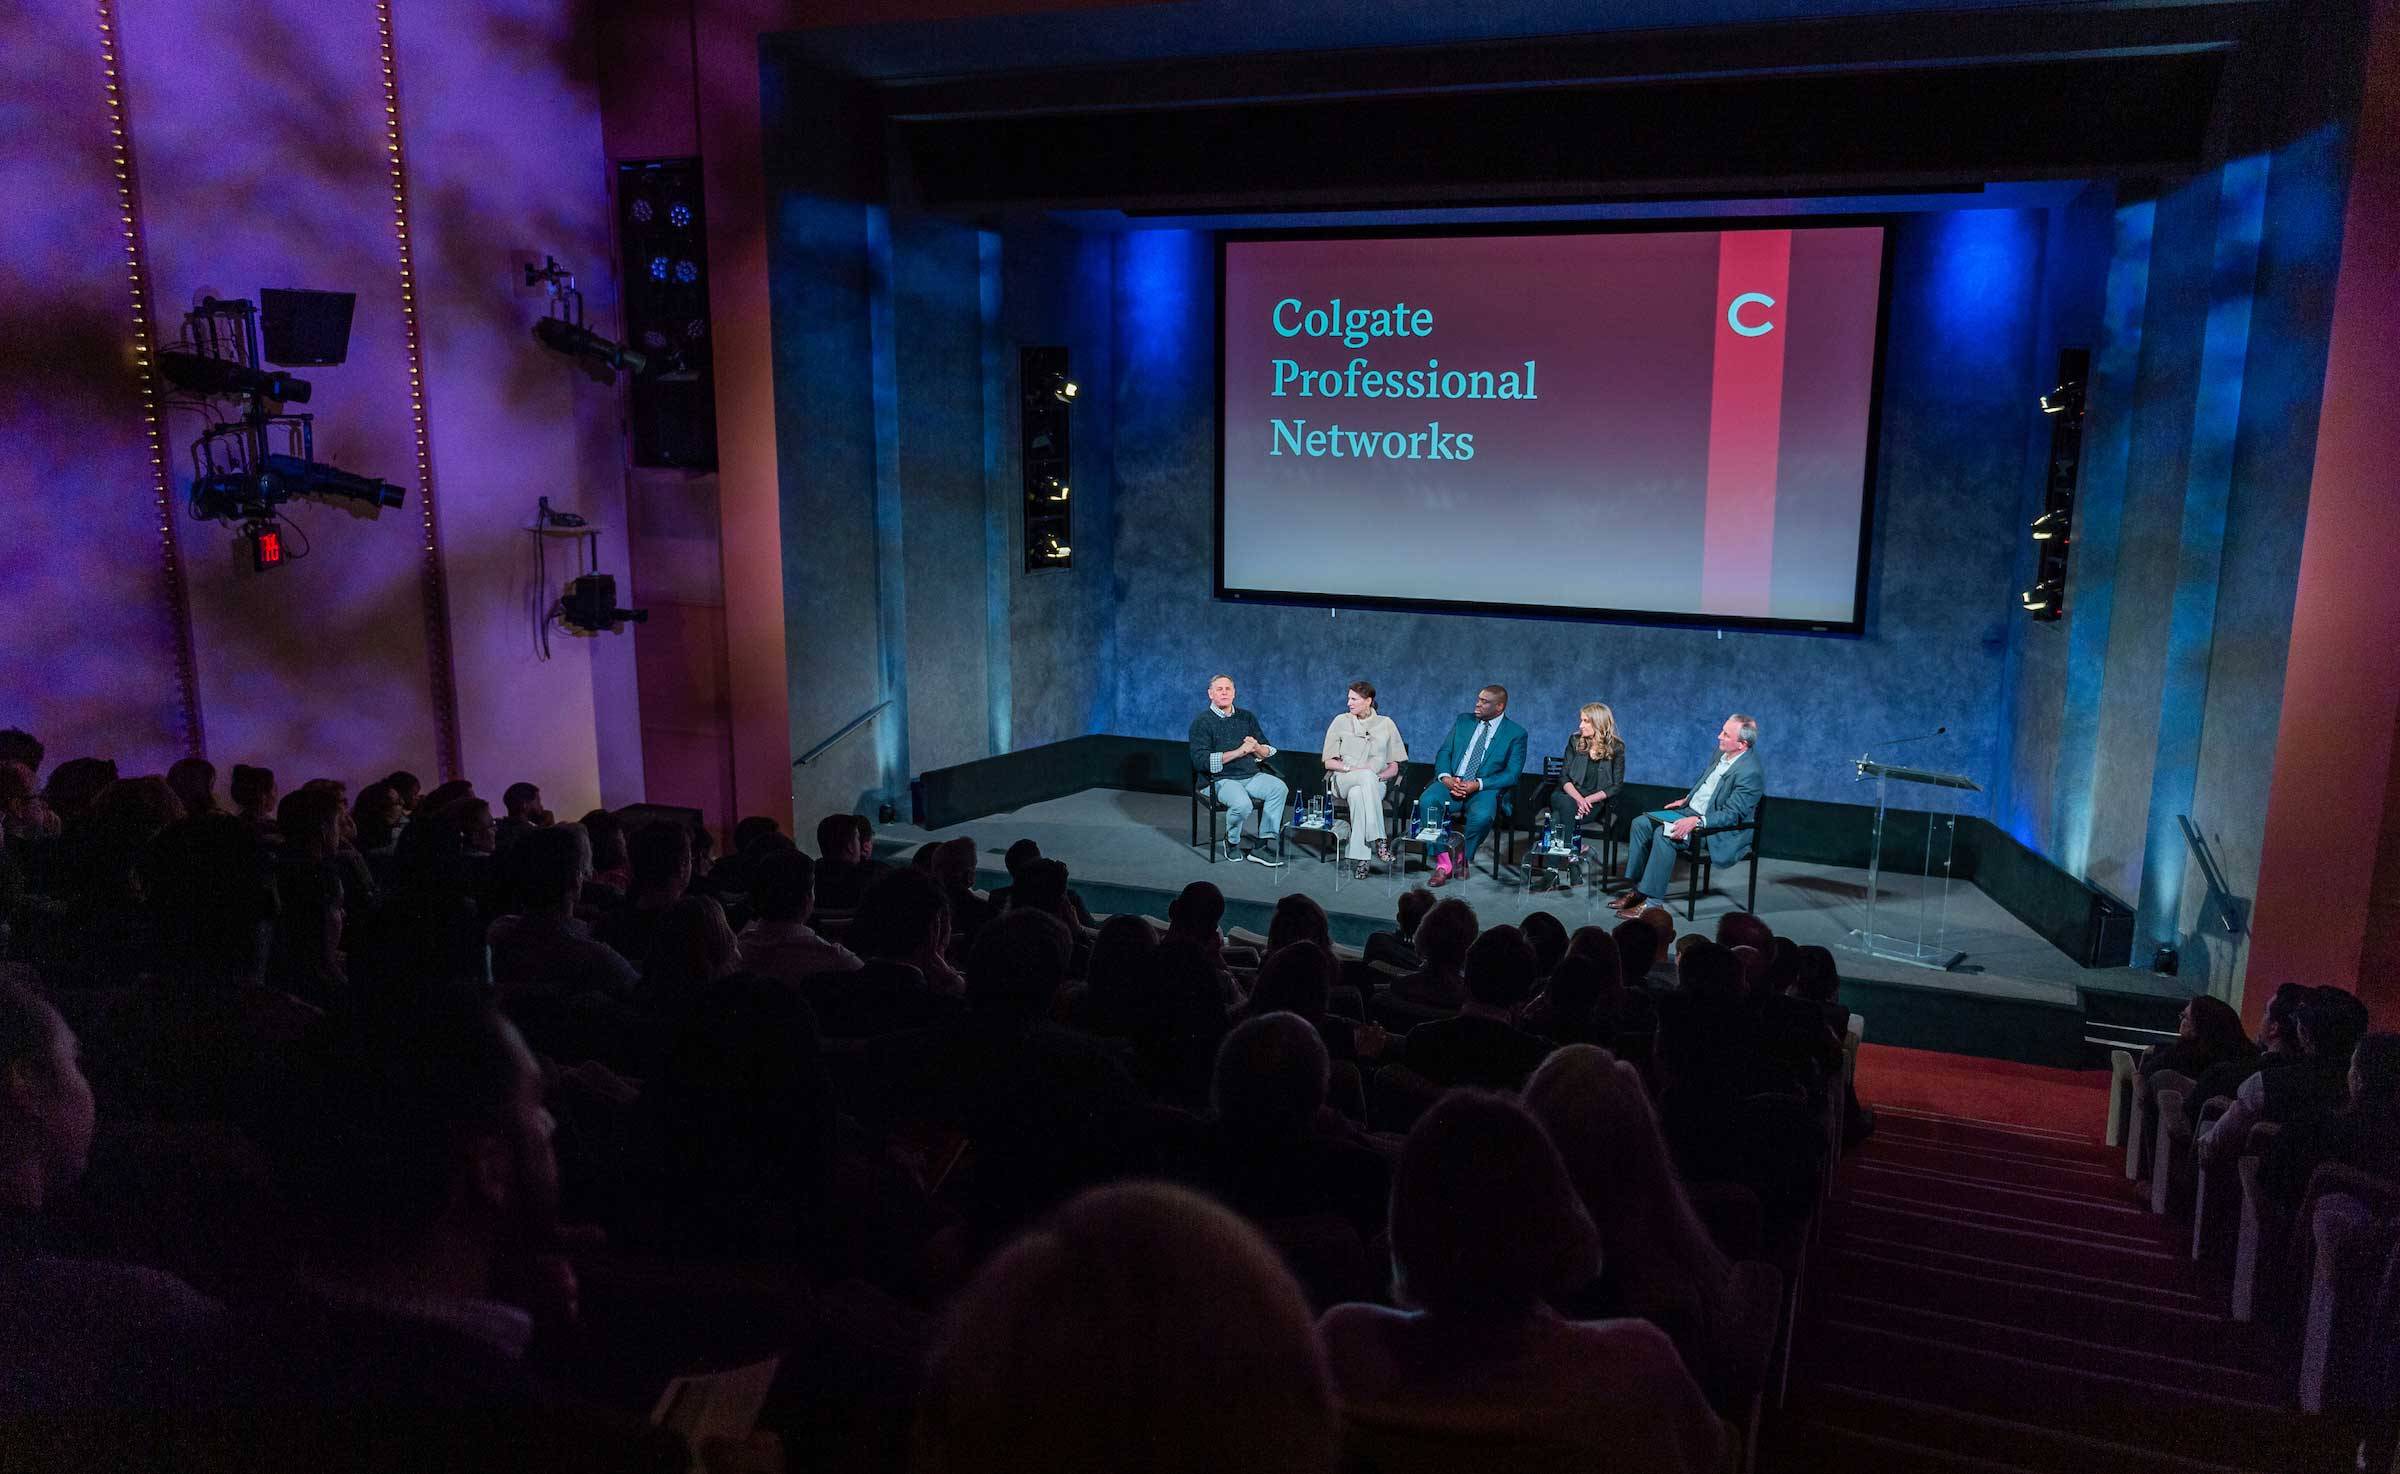 A panel talk during the recent Colgate Professional Networks Innovation and Creativity event in New York City